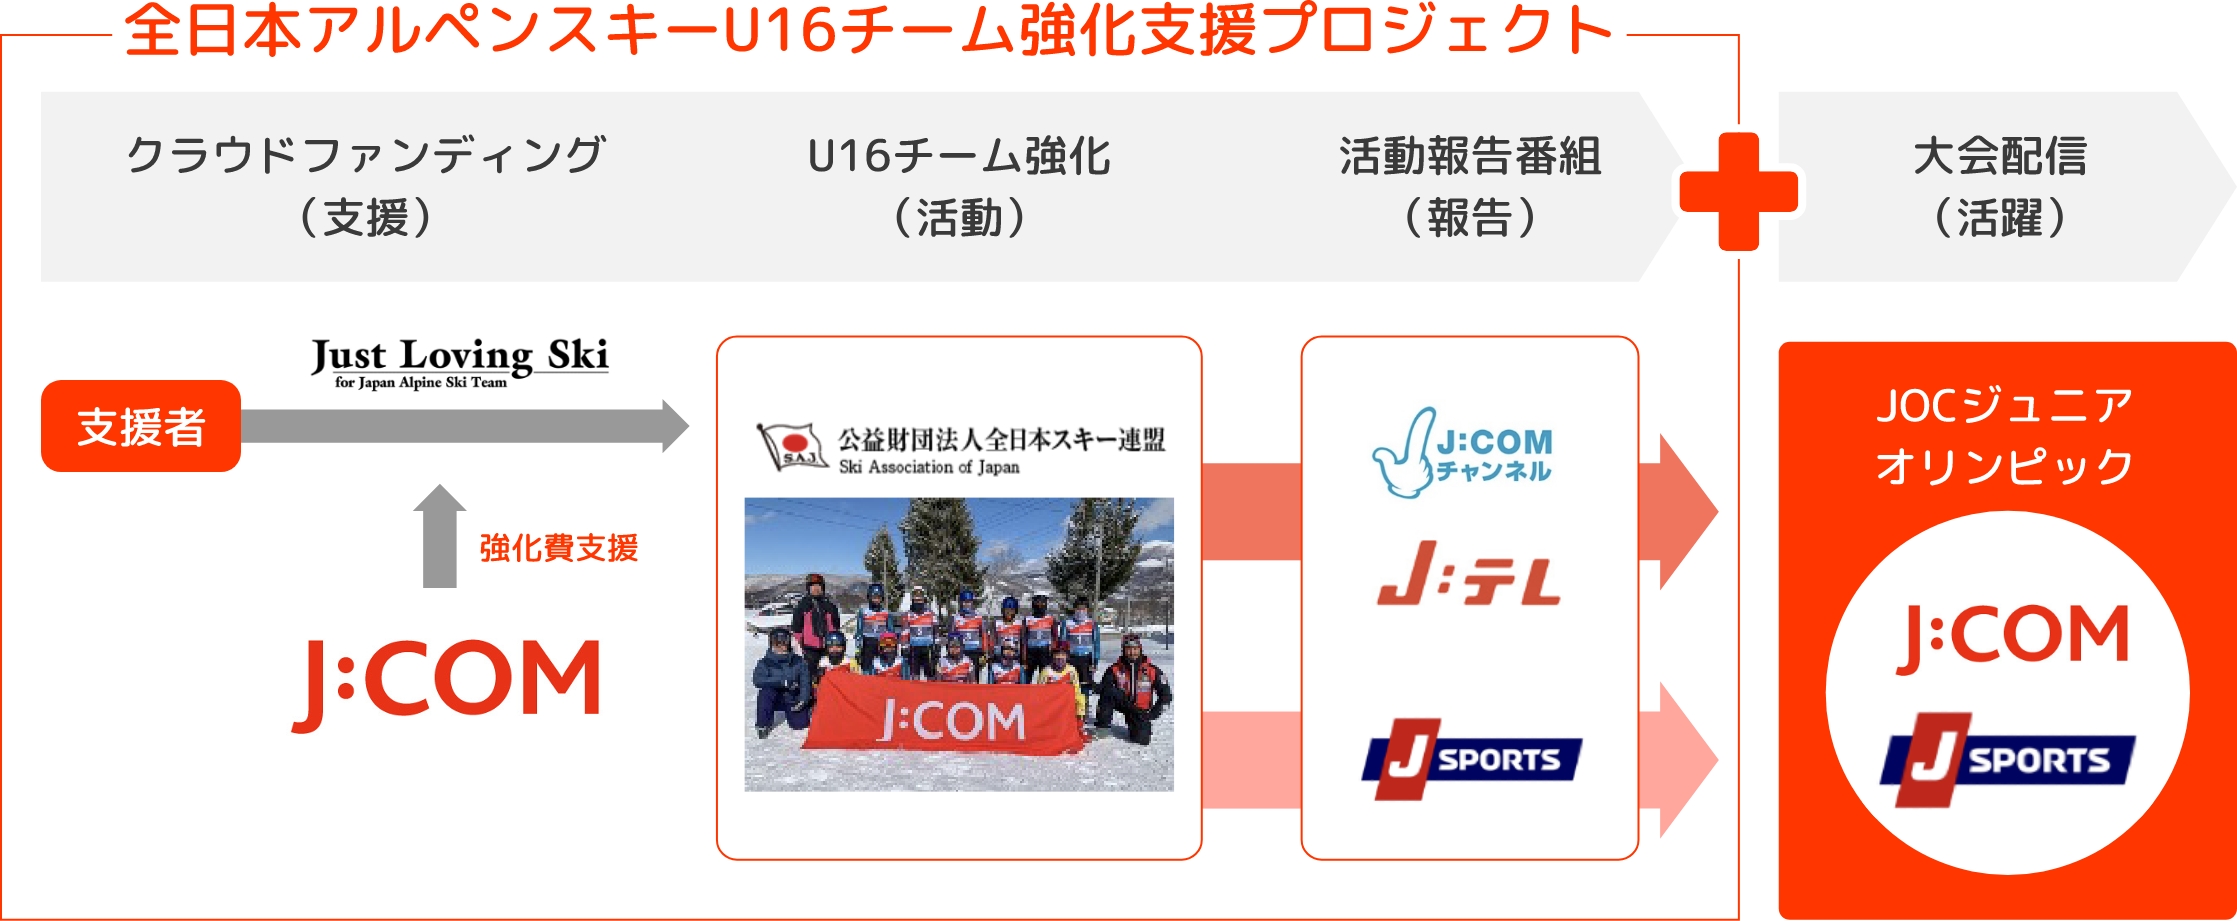 Crowdfunding (support), U16 team strengthening (activity), activity report program (report) + competition distribution (performance)